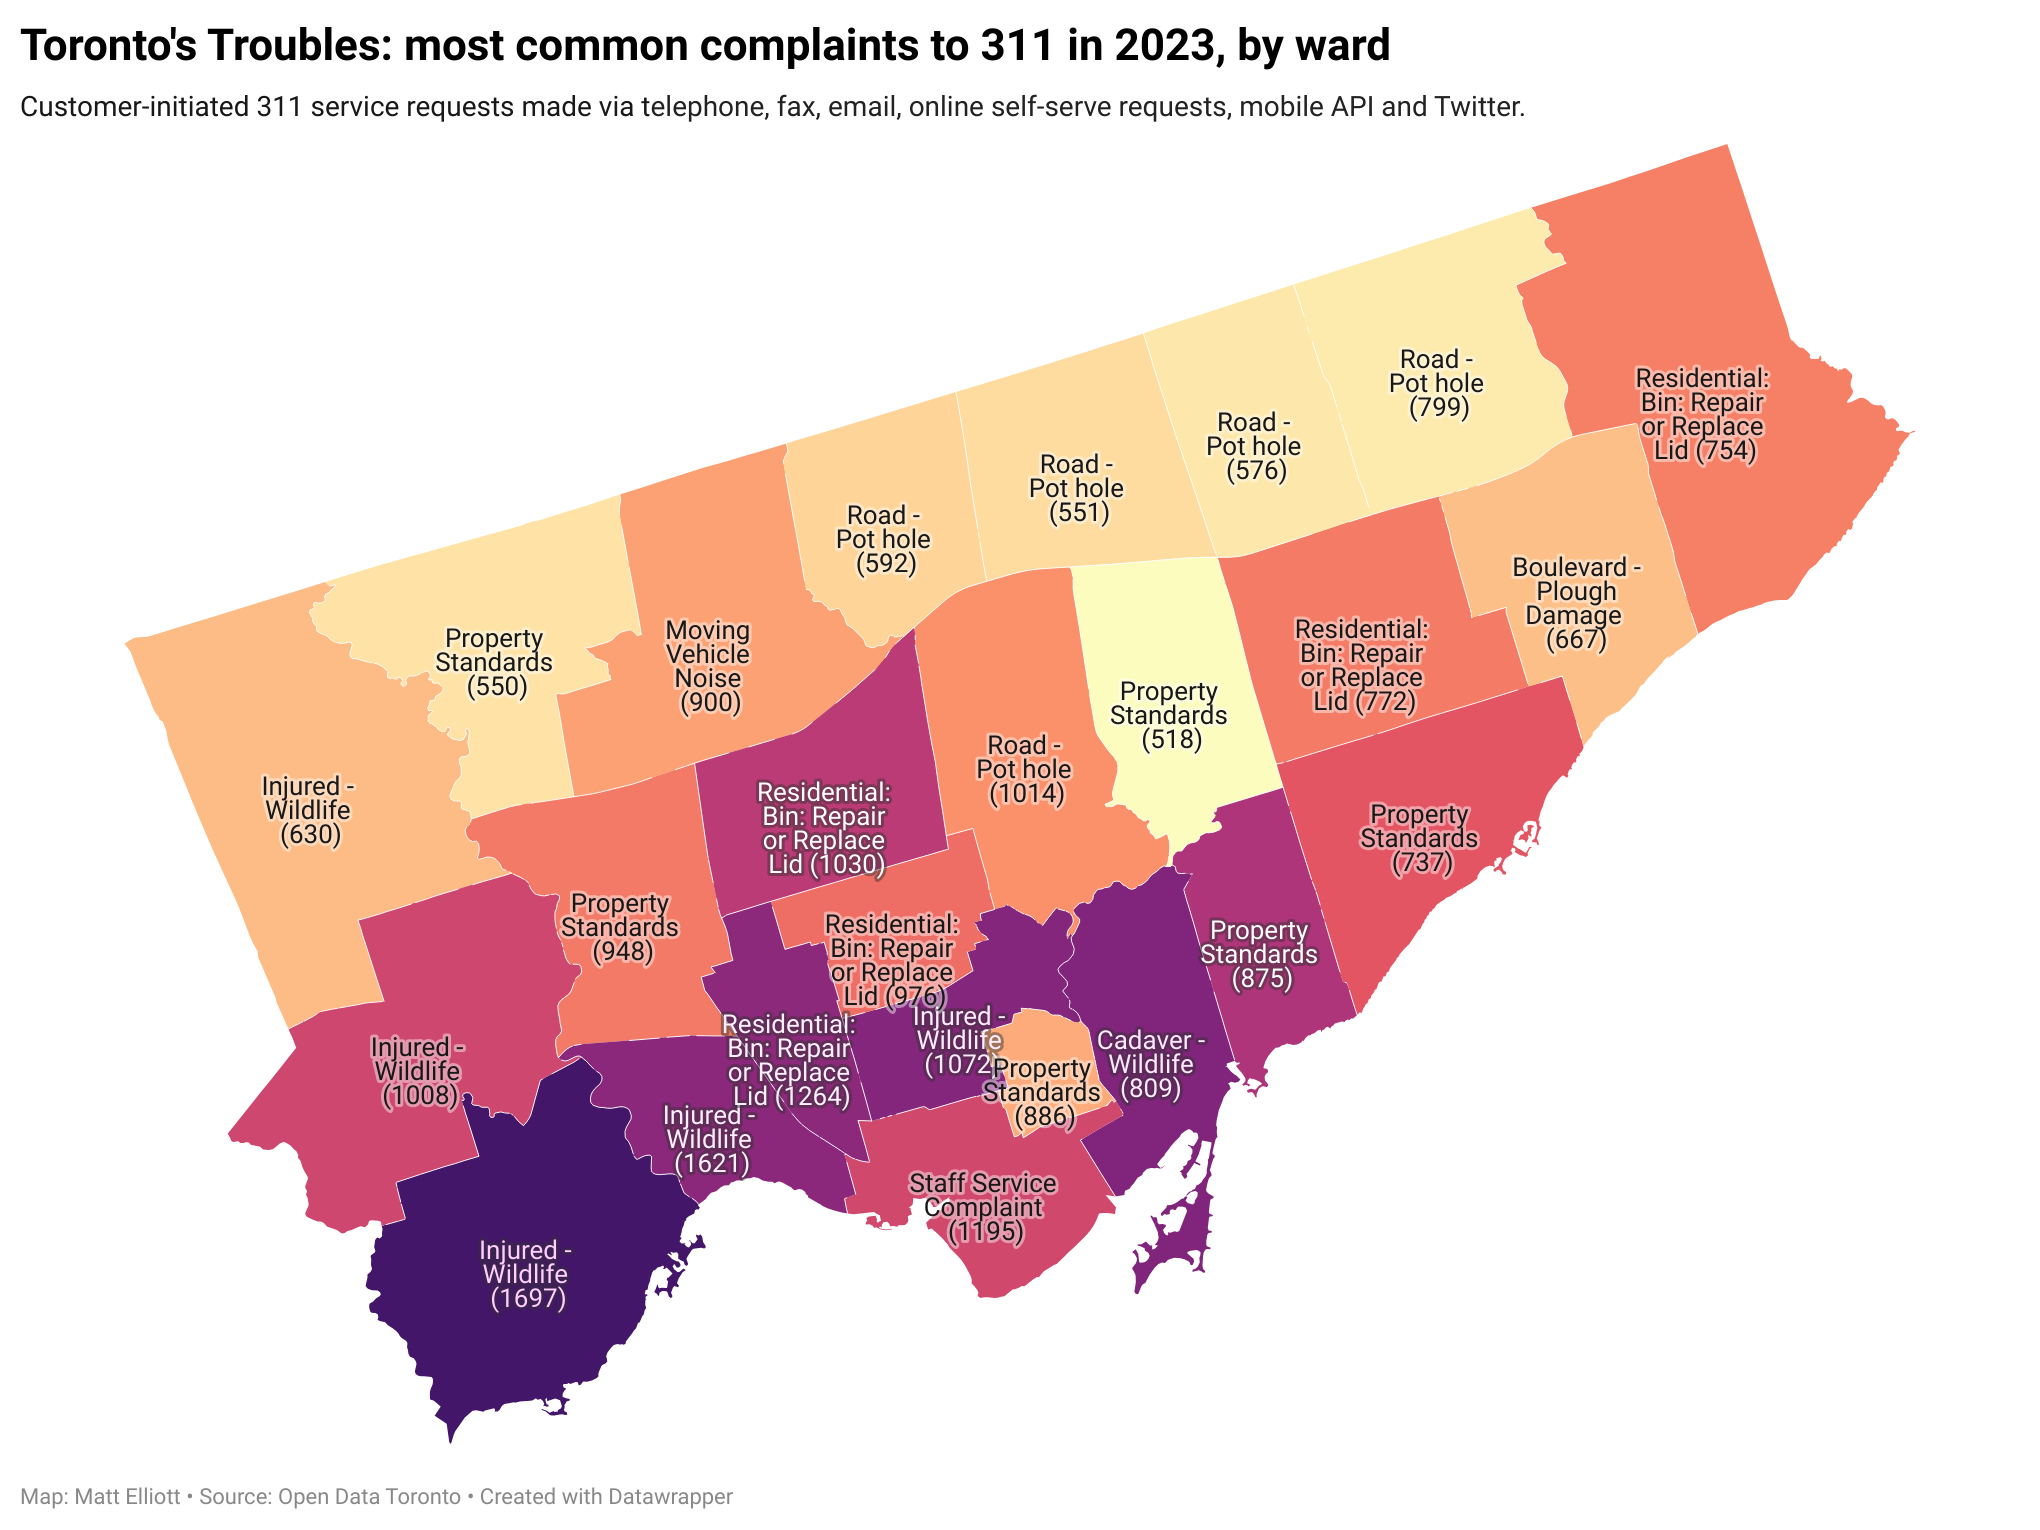 Map of Toronto wards with top 311 service request from 2023